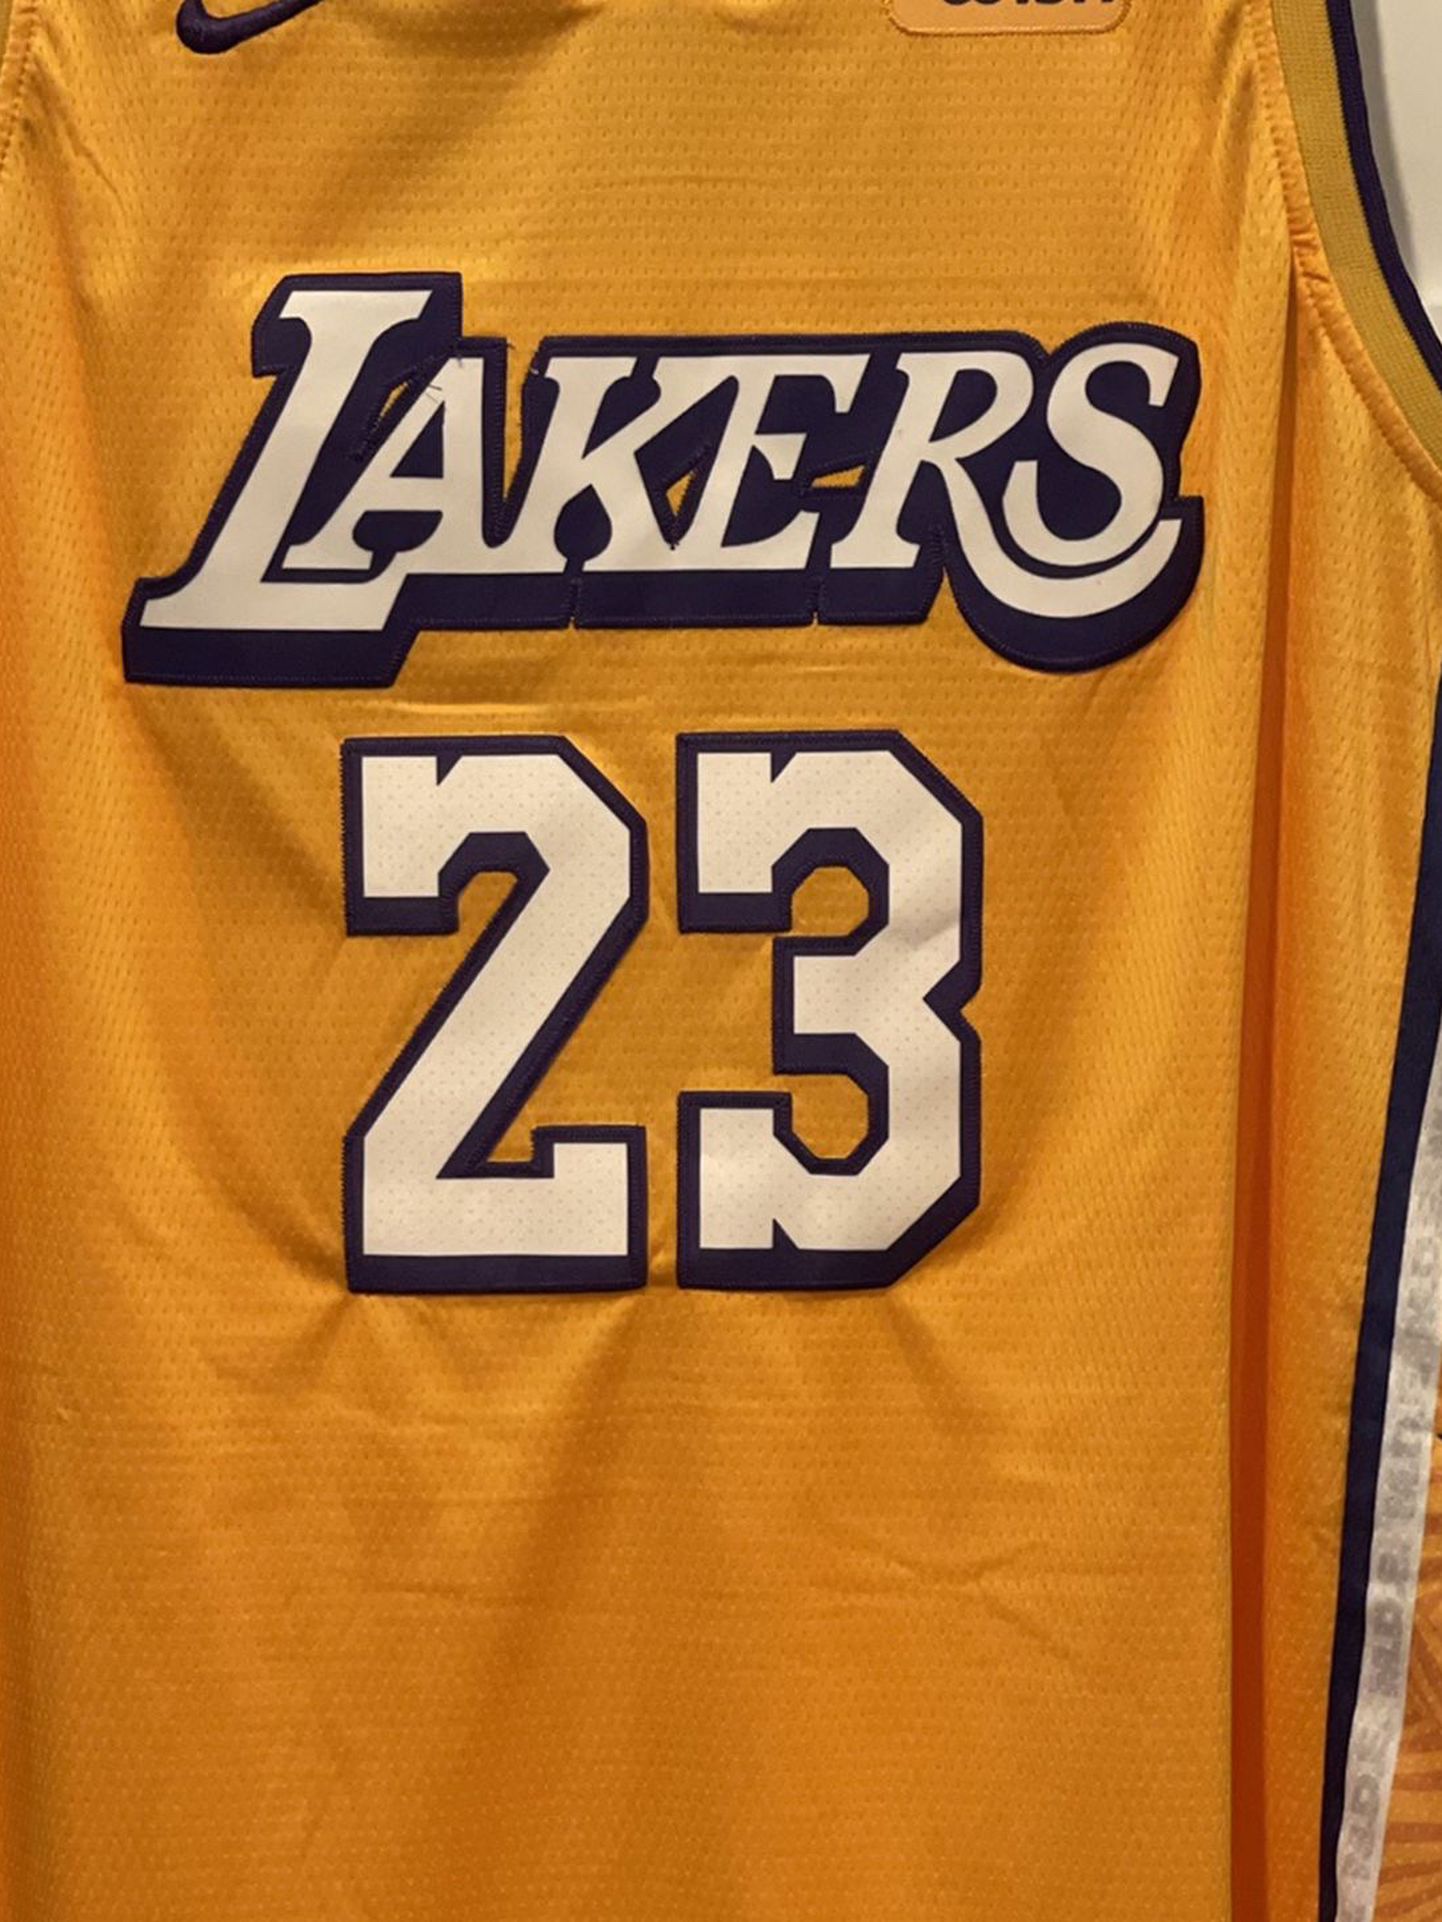 Los Angeles Lakers Lebron James Jersey